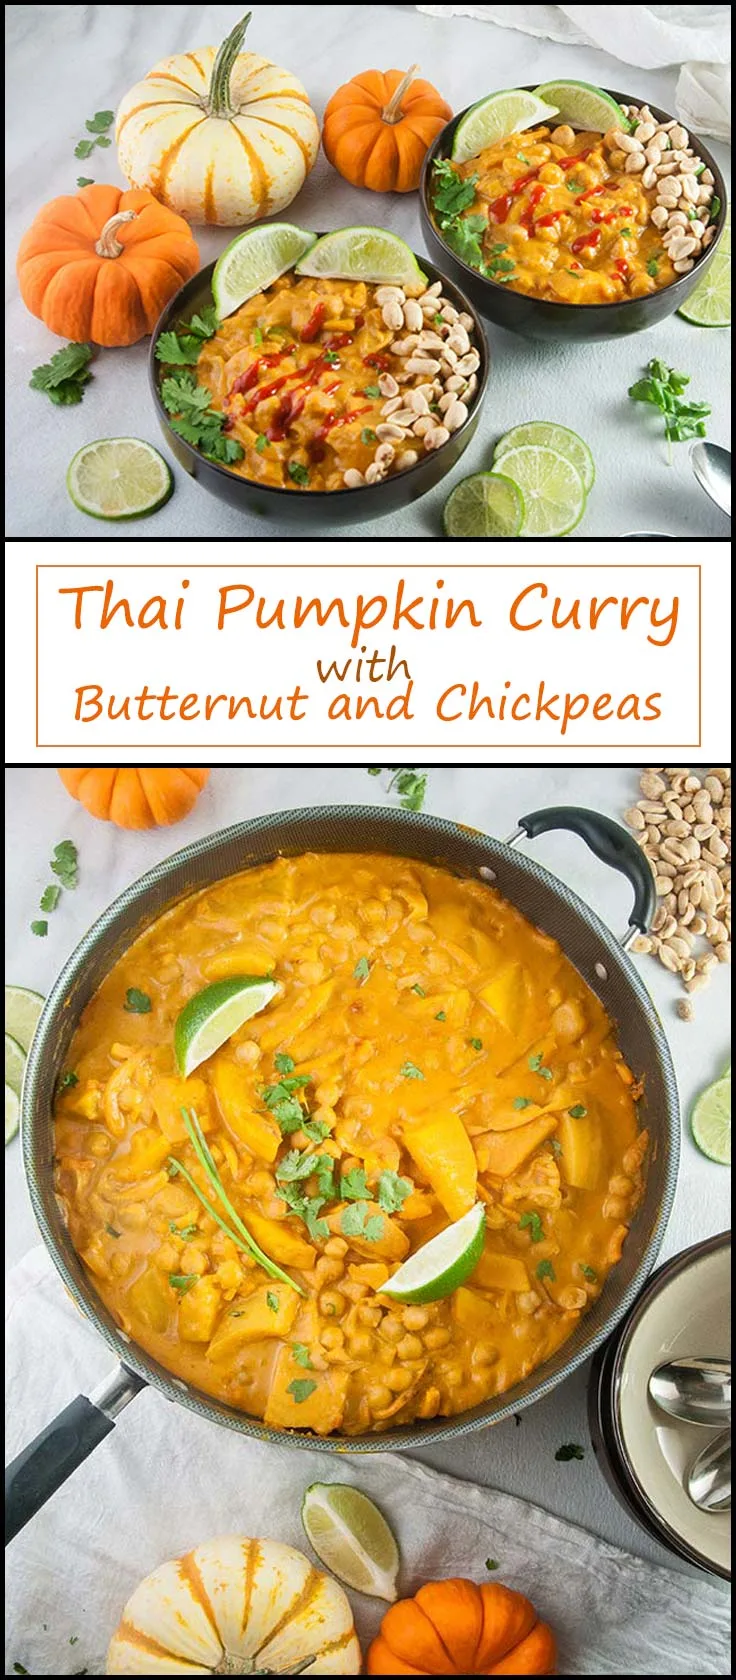 Easy Thai Pumpkin Curry with Butternut Squash and Chickpeas from www.seasonedsprinkles.com